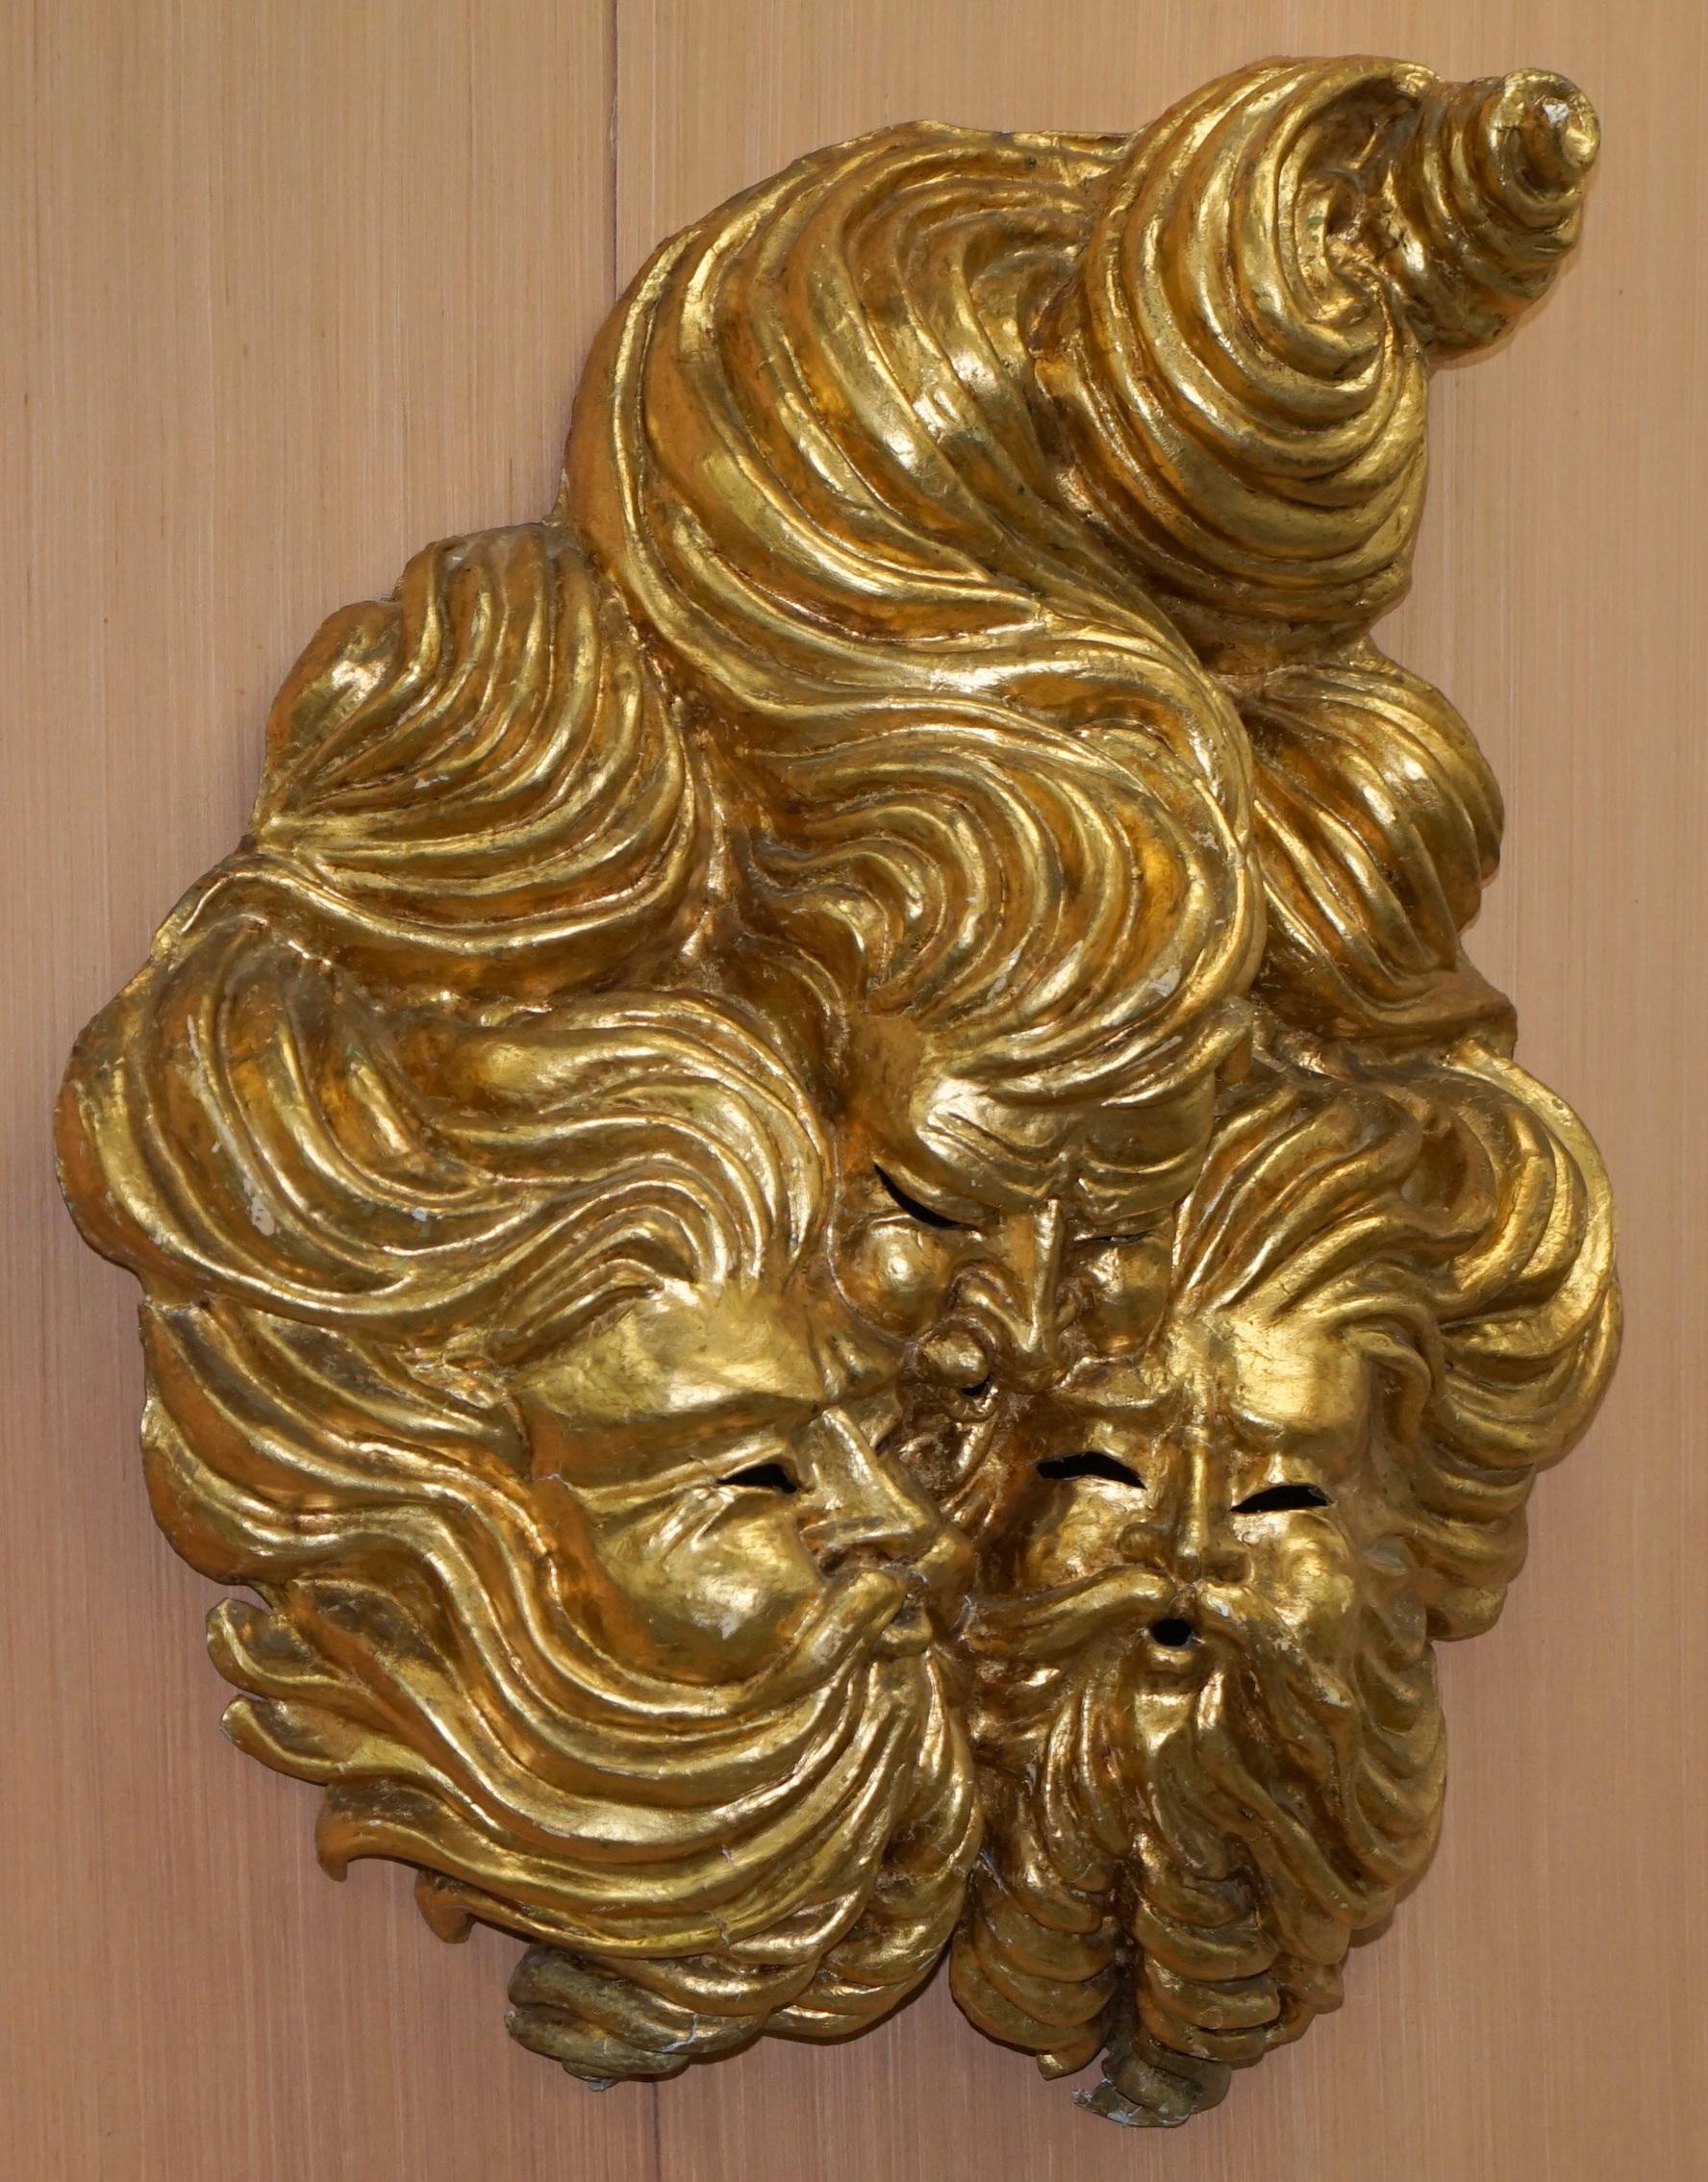 We are delighted to offer for sale this very rare and large gold leaf gilt wall sculpture in papier mache of the Gods of Wind

This is one of a pair, the second piece is half the size and has one gods head, its listed under my other items

They